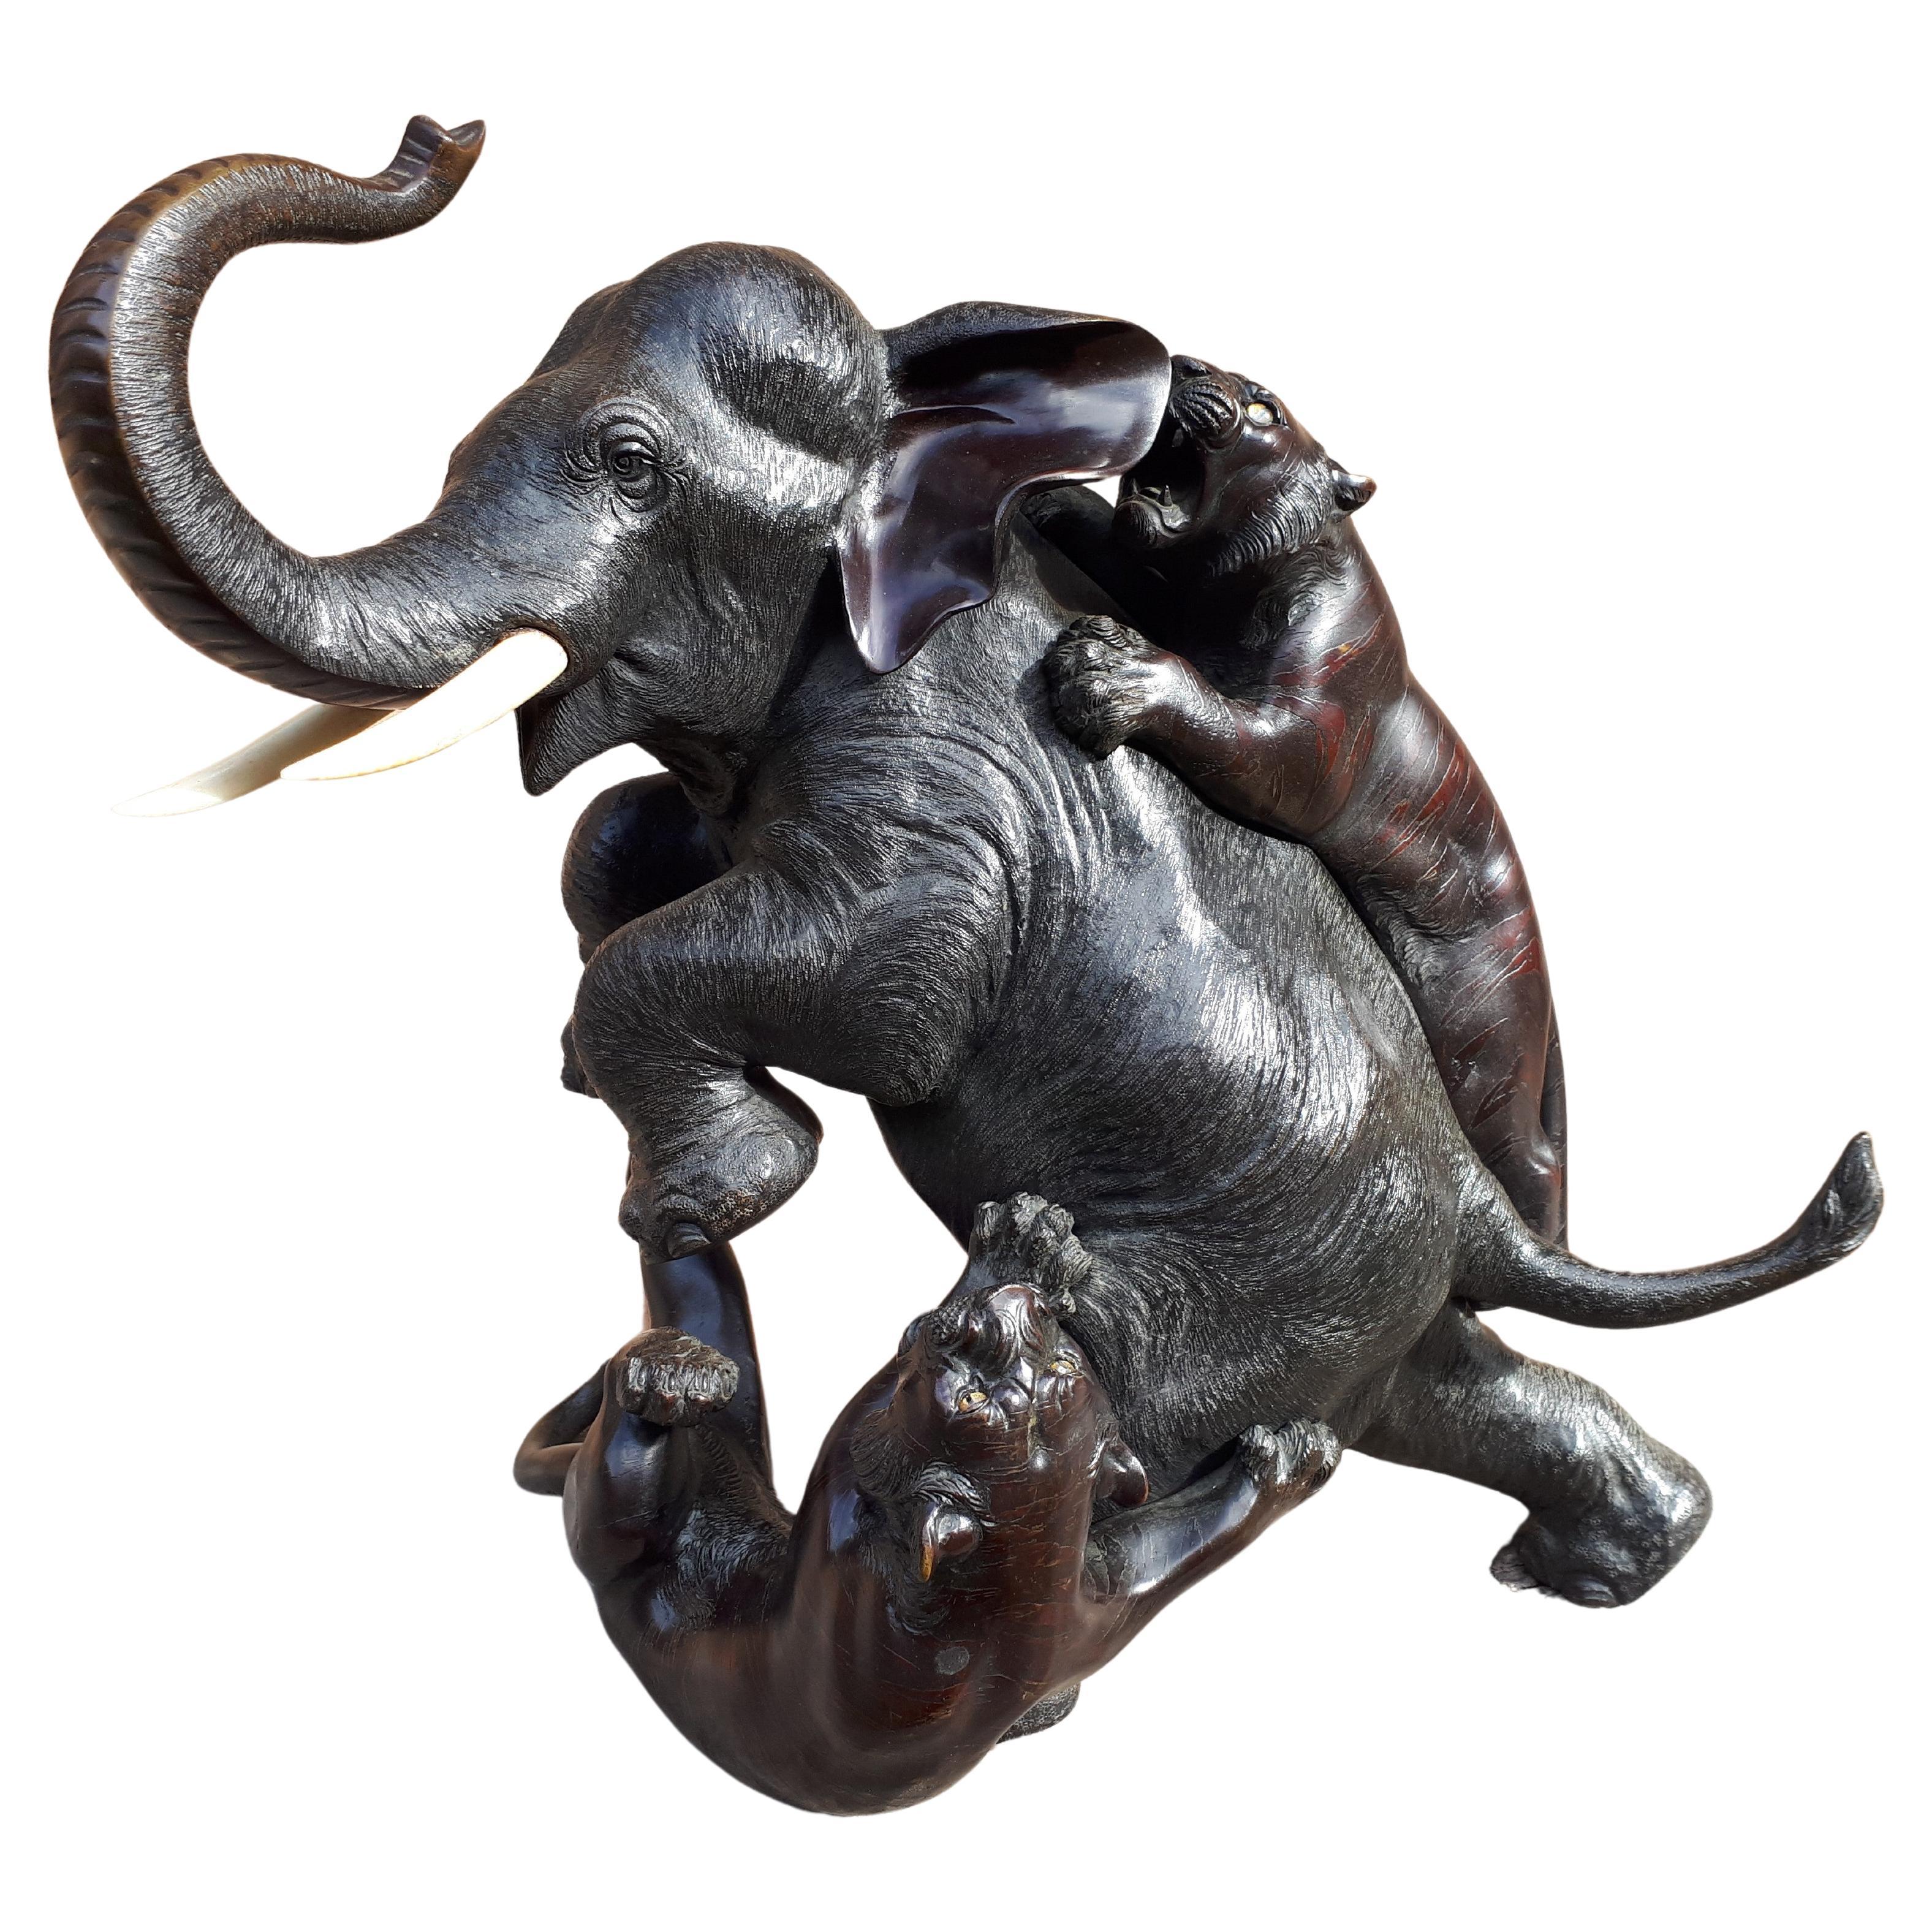 Okimono - Sculpture : Elephant attacked by tigers, by Mitsumoto, Japan Meiji Era For Sale